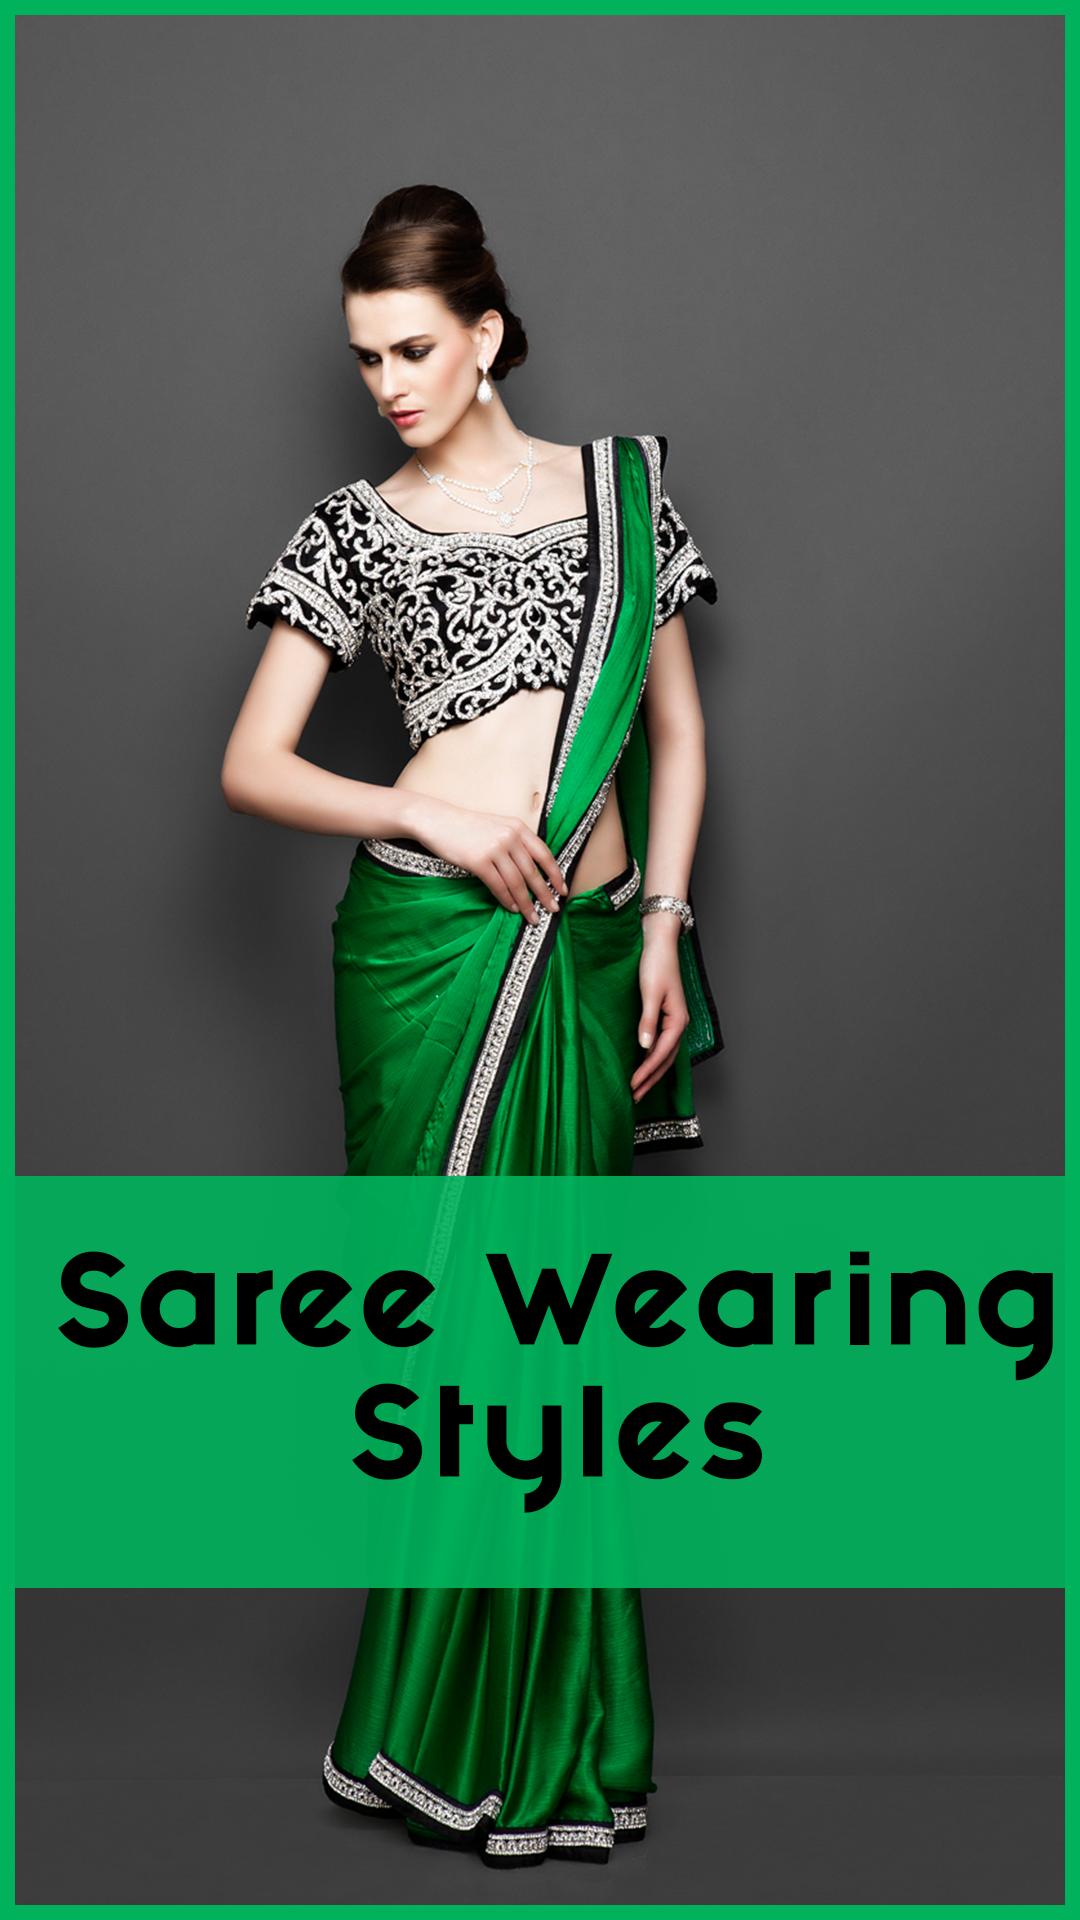 Saree wearing styles for Android - APK Download